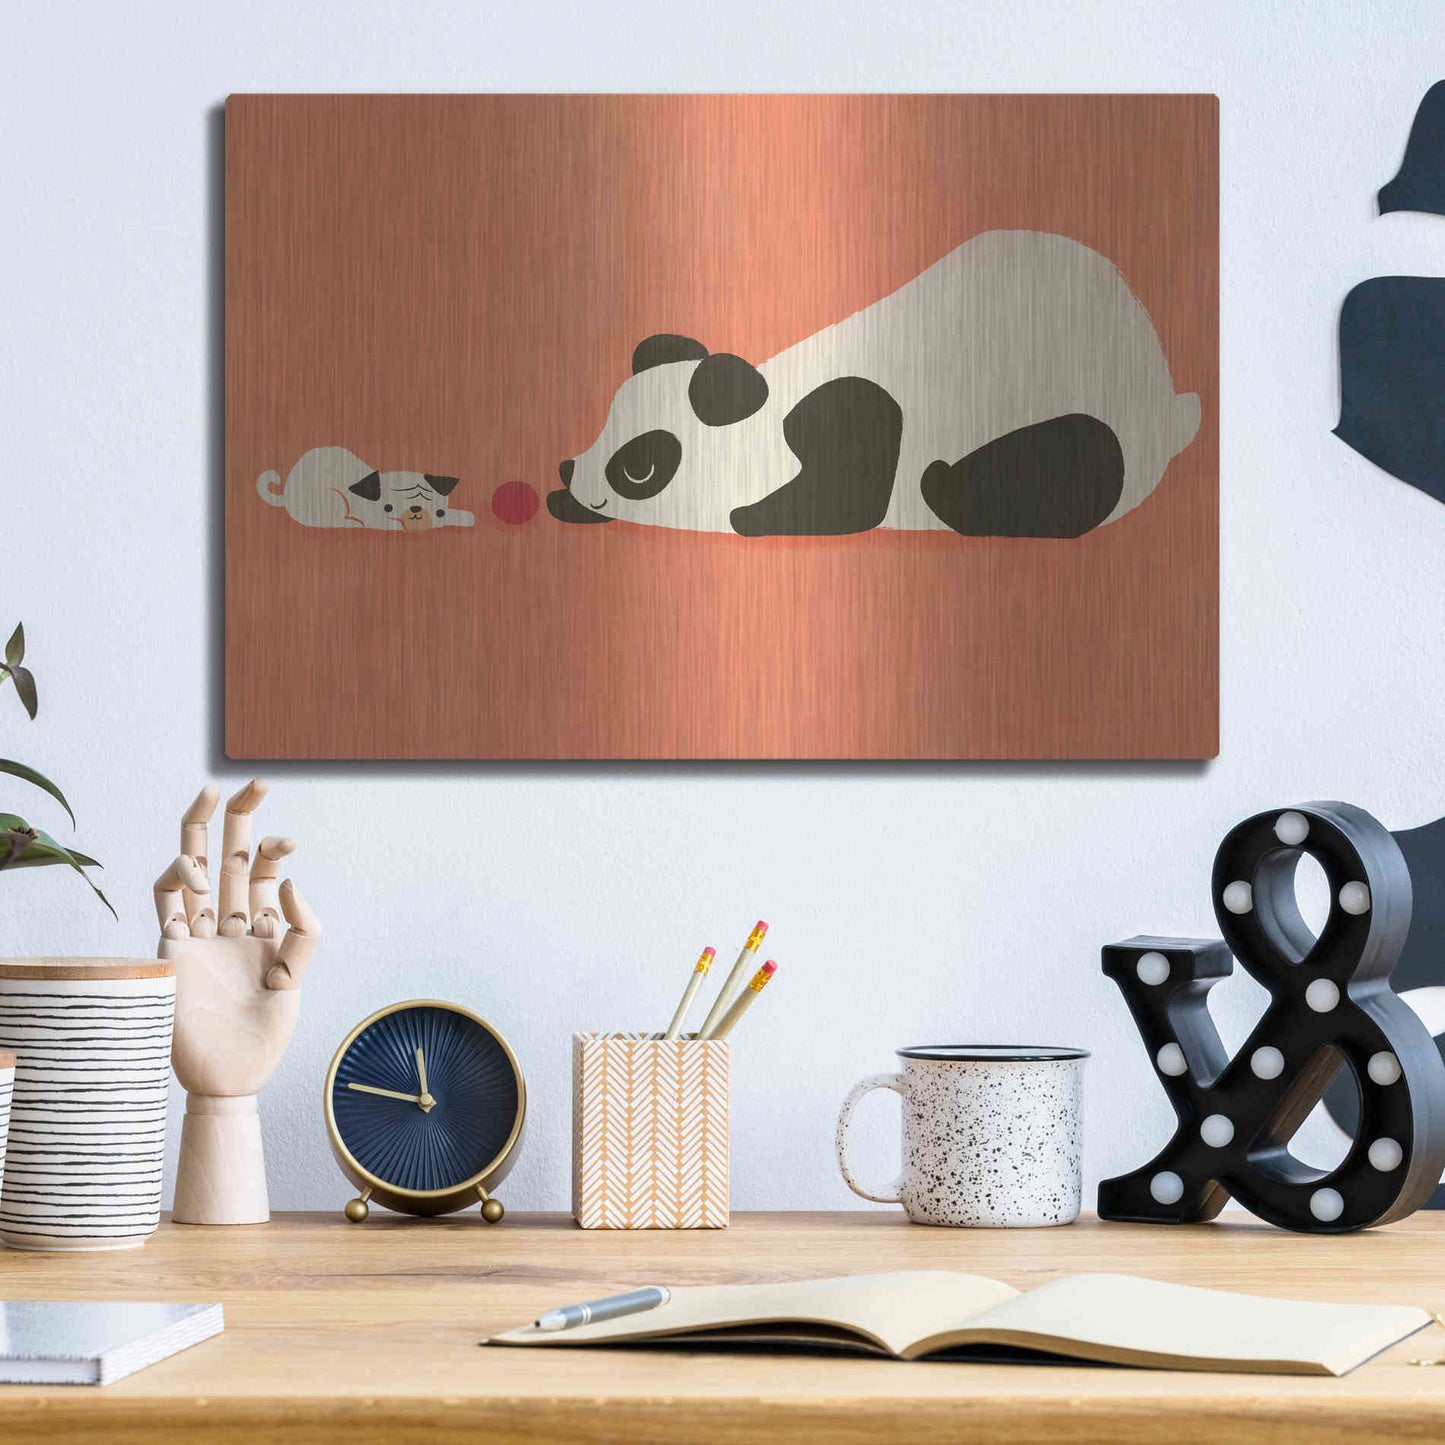 Luxe Metal Art 'The Pug and the Panda' by Jay Fleck, Metal Wall Art,16x12